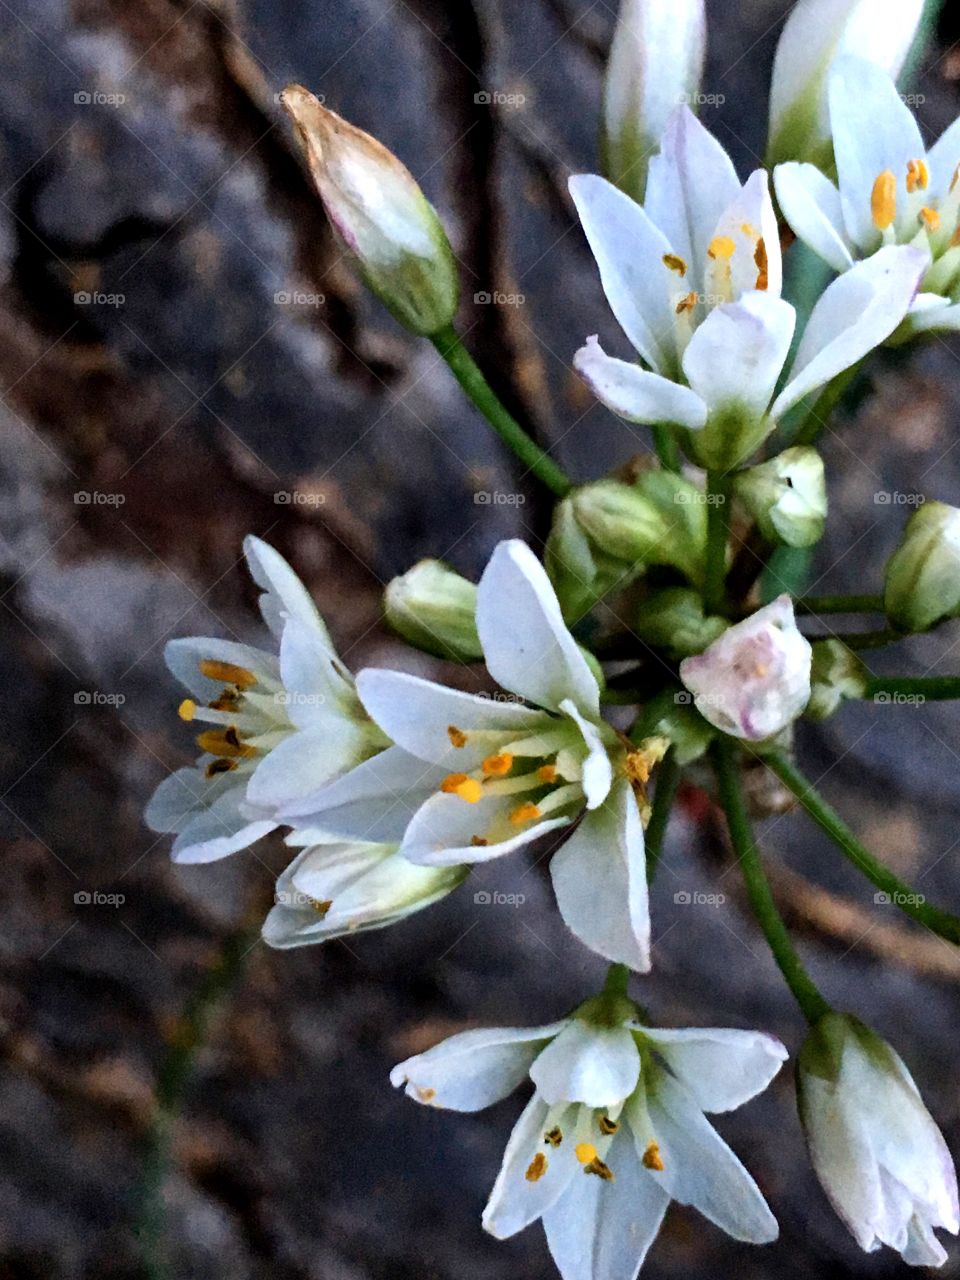 The flowers of the garlic plant